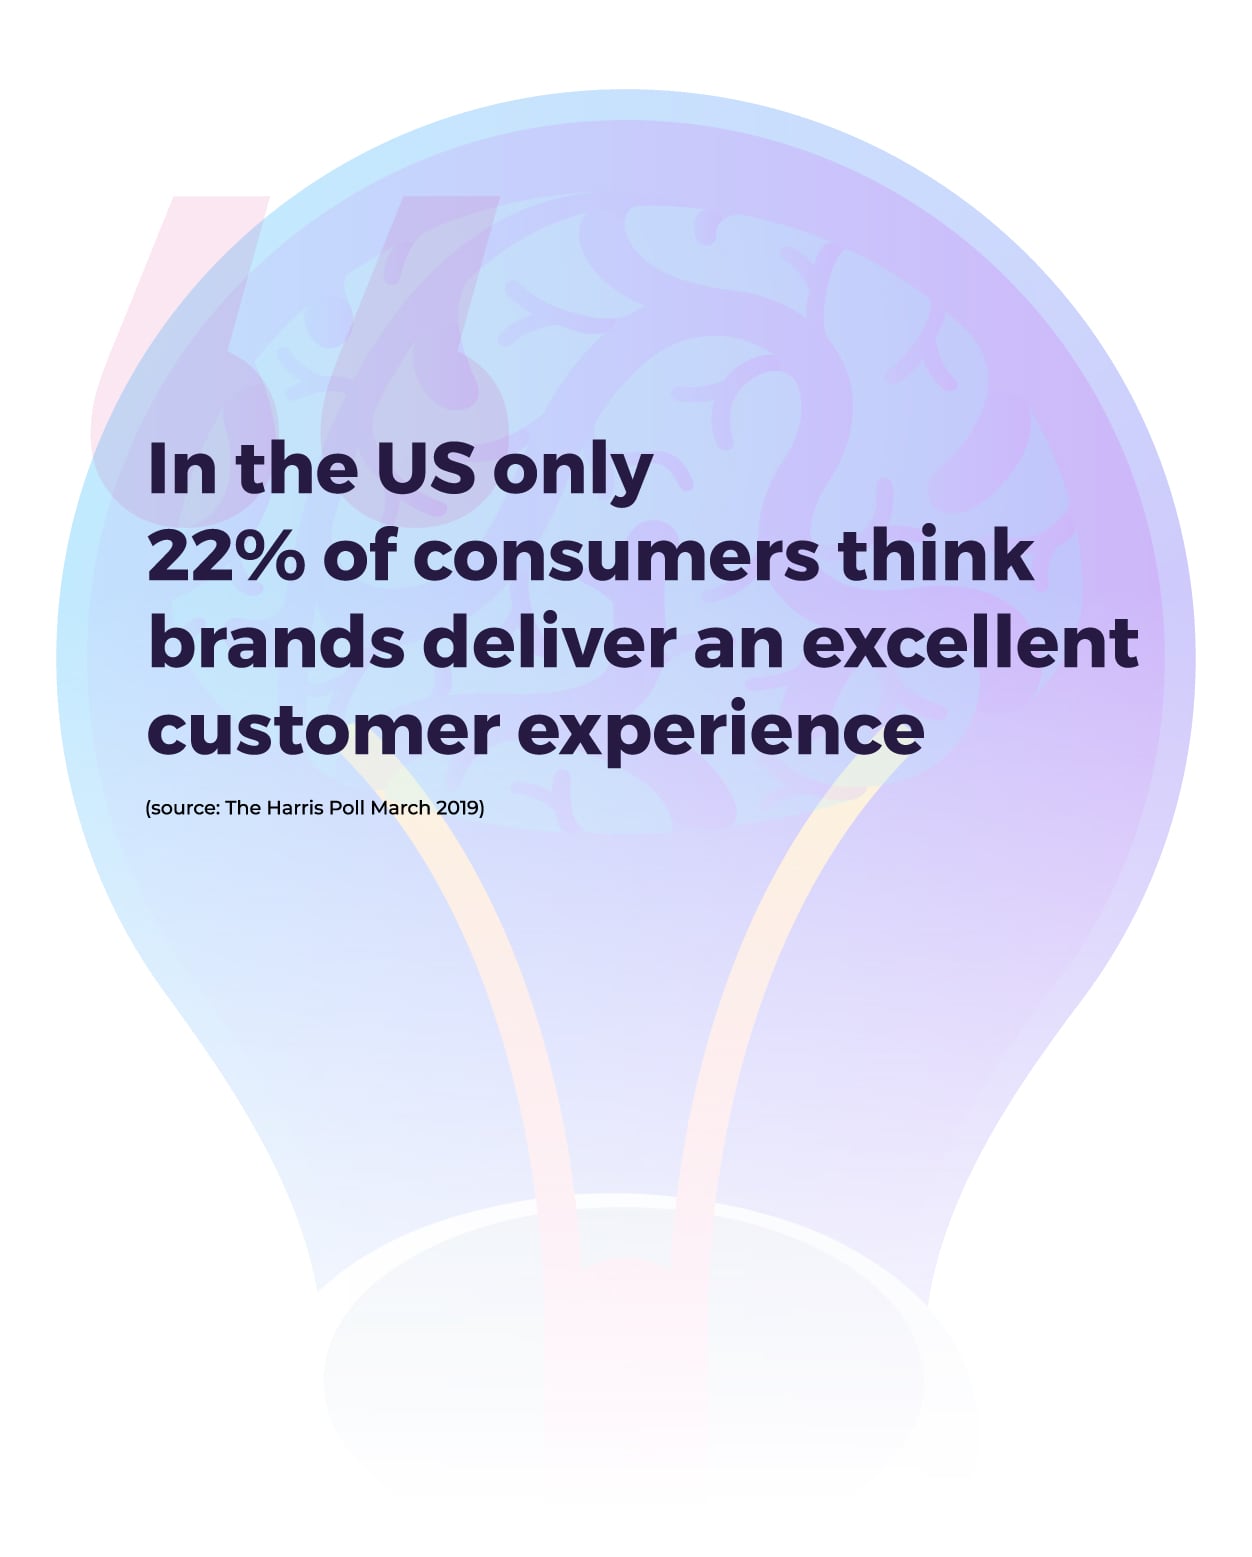 22 percent of consumers think brands deliver good customer experience